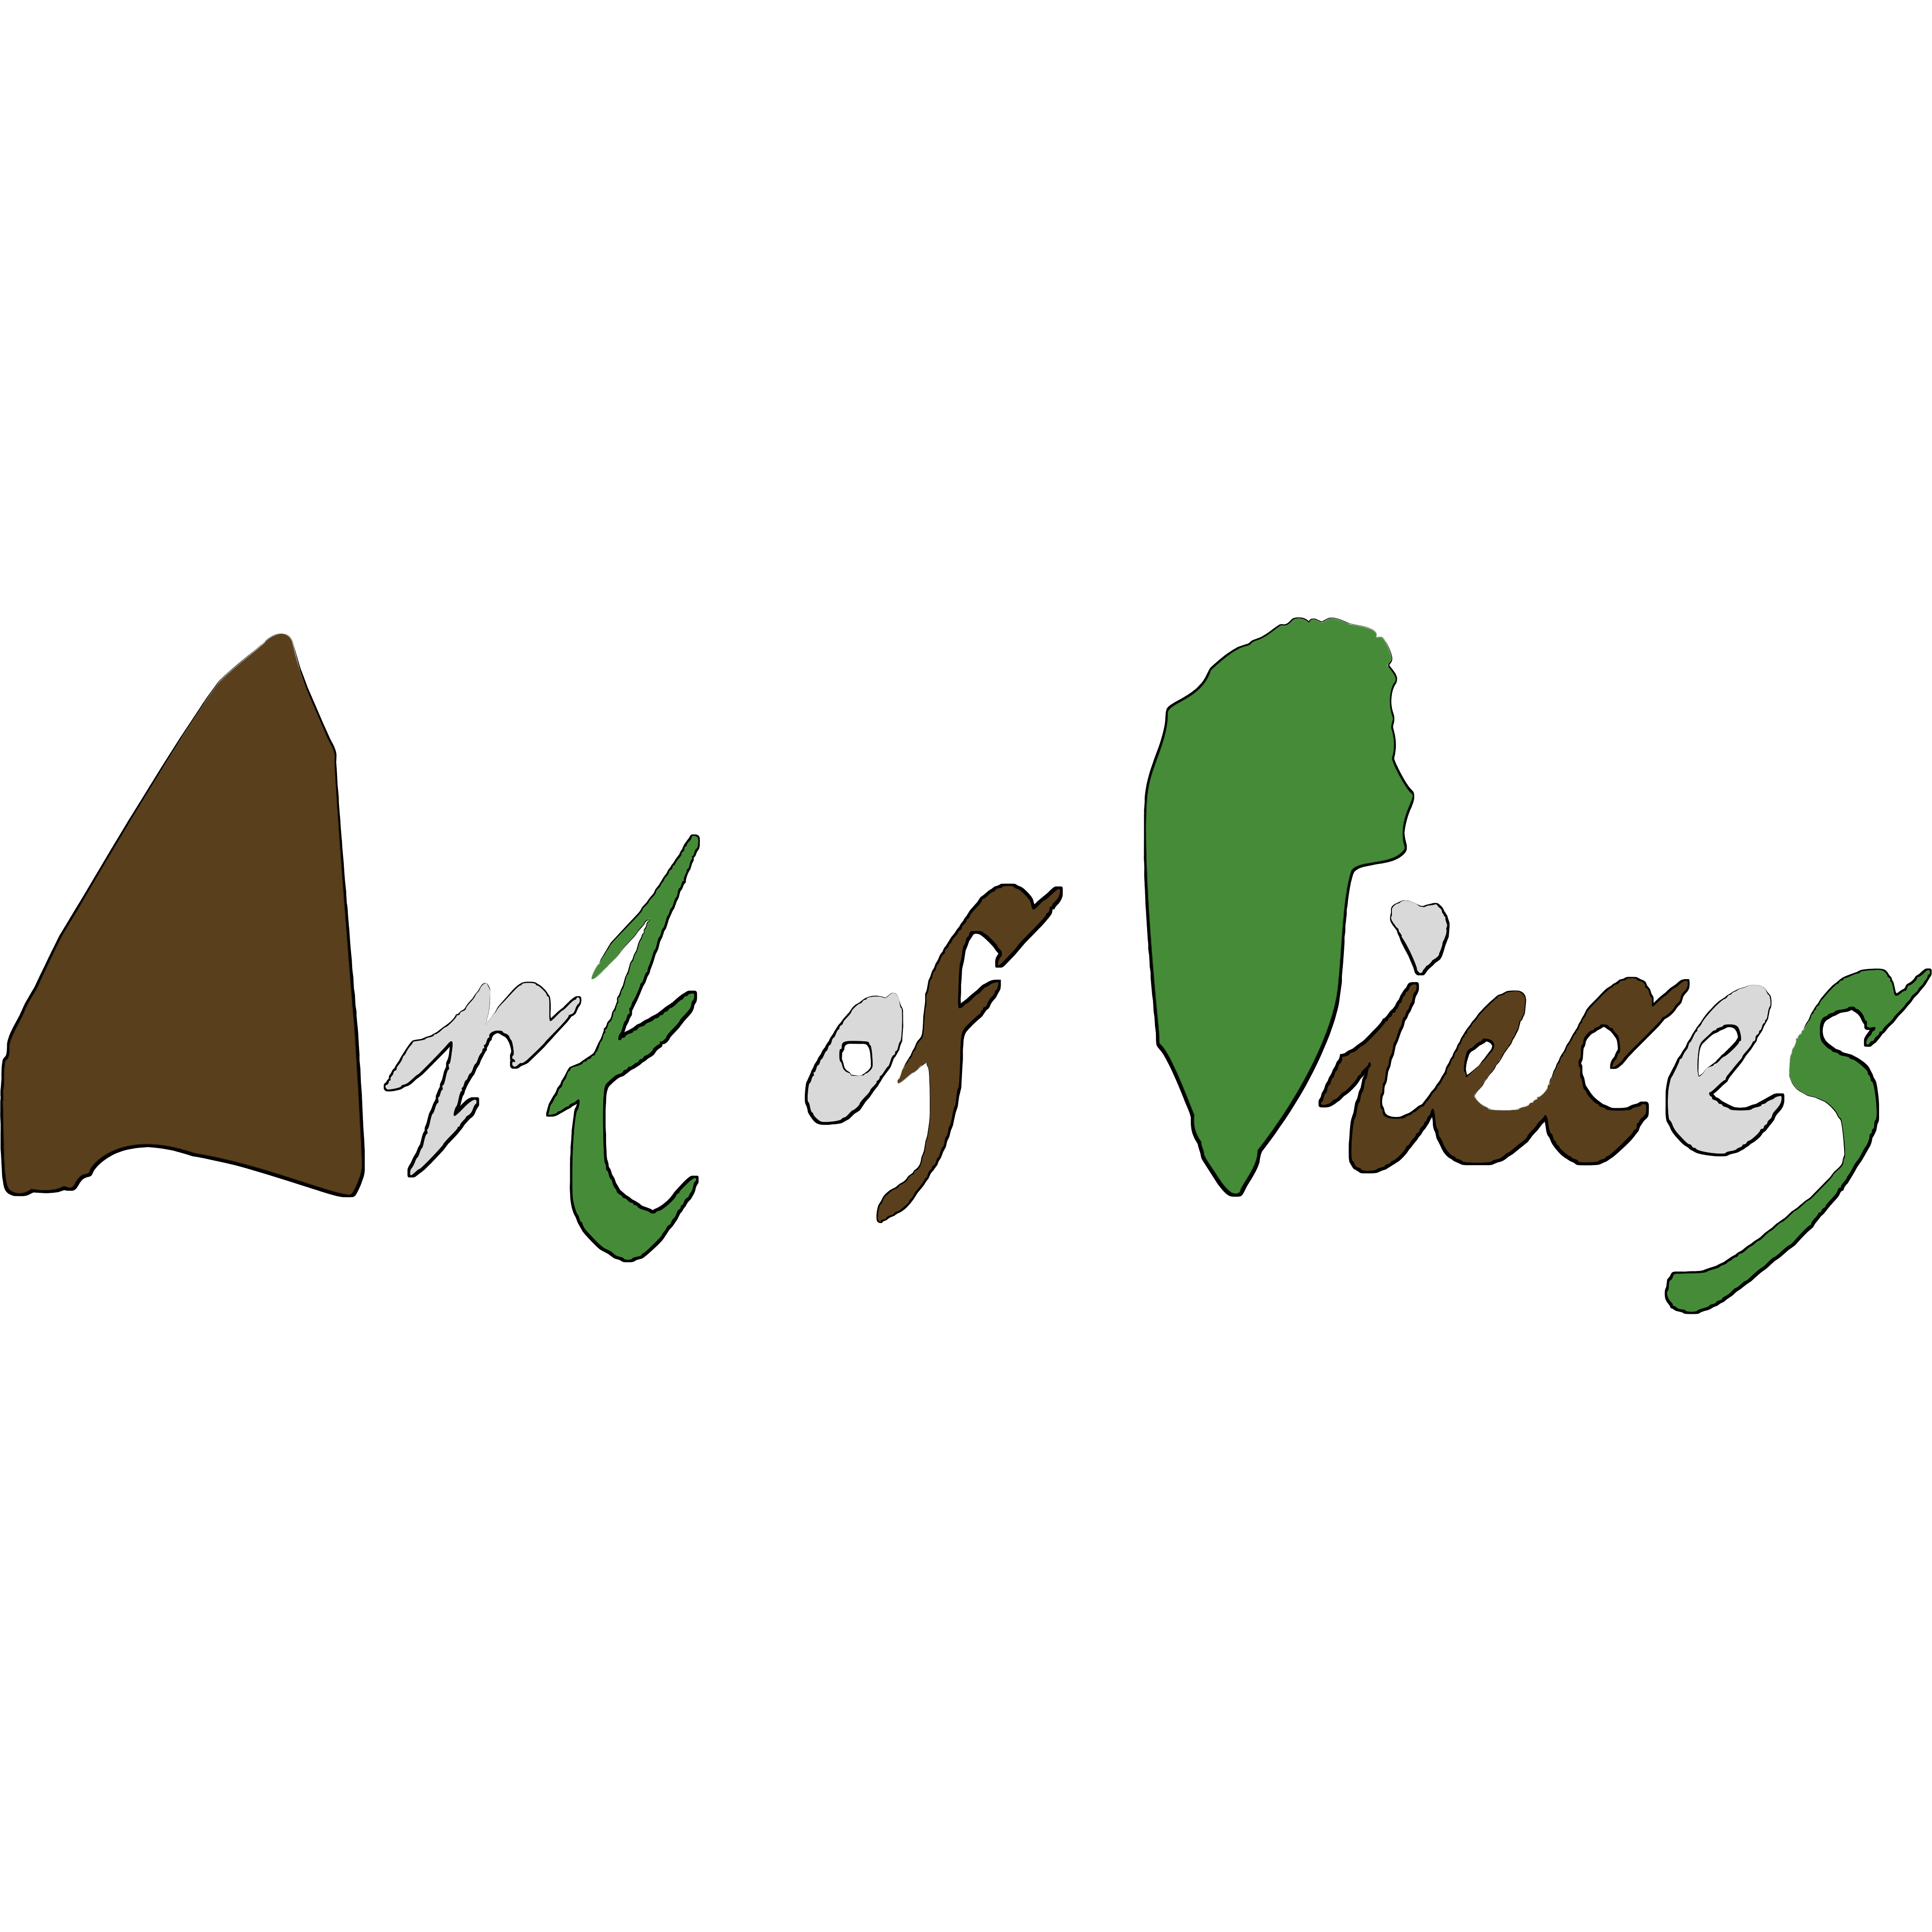 My logo for my mother's art brand Art of Pieces.  It features lettering based on her broken glass art and her calligraphy that reads 'Art of Pieces'.